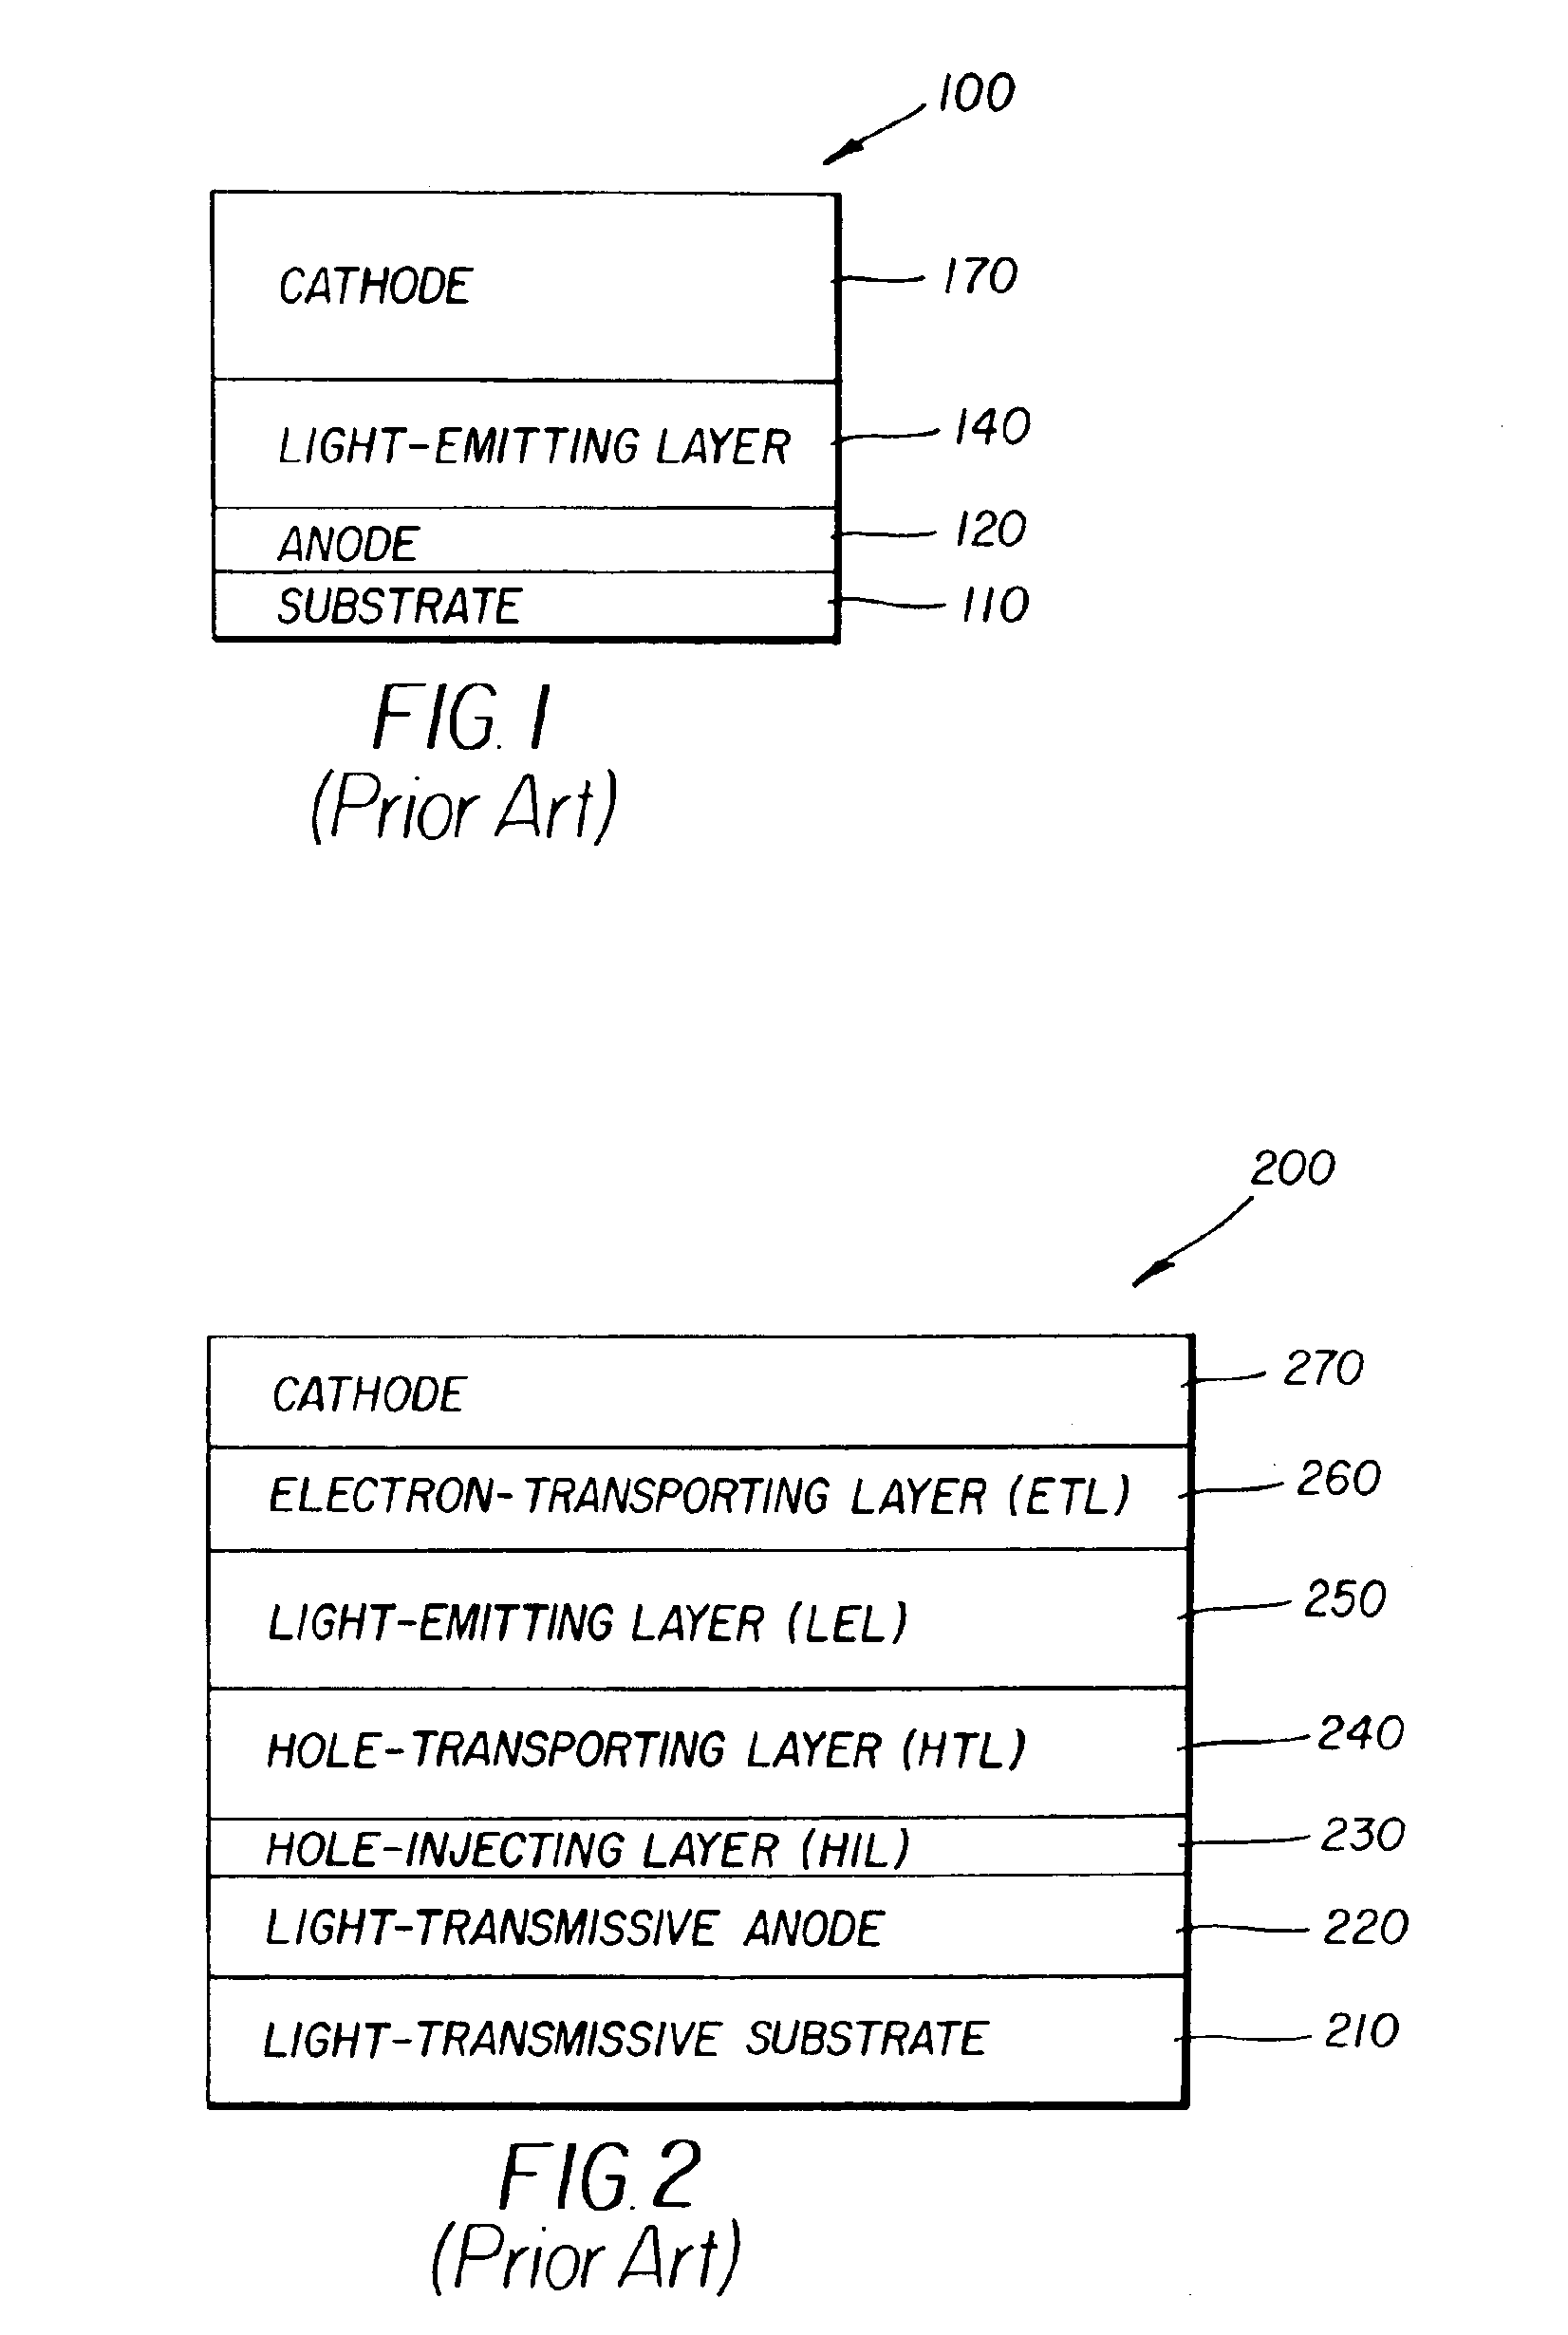 White light-emitting OLED device having a blue light-emitting layer doped with an electron-transporting or a hole-transporting material or both